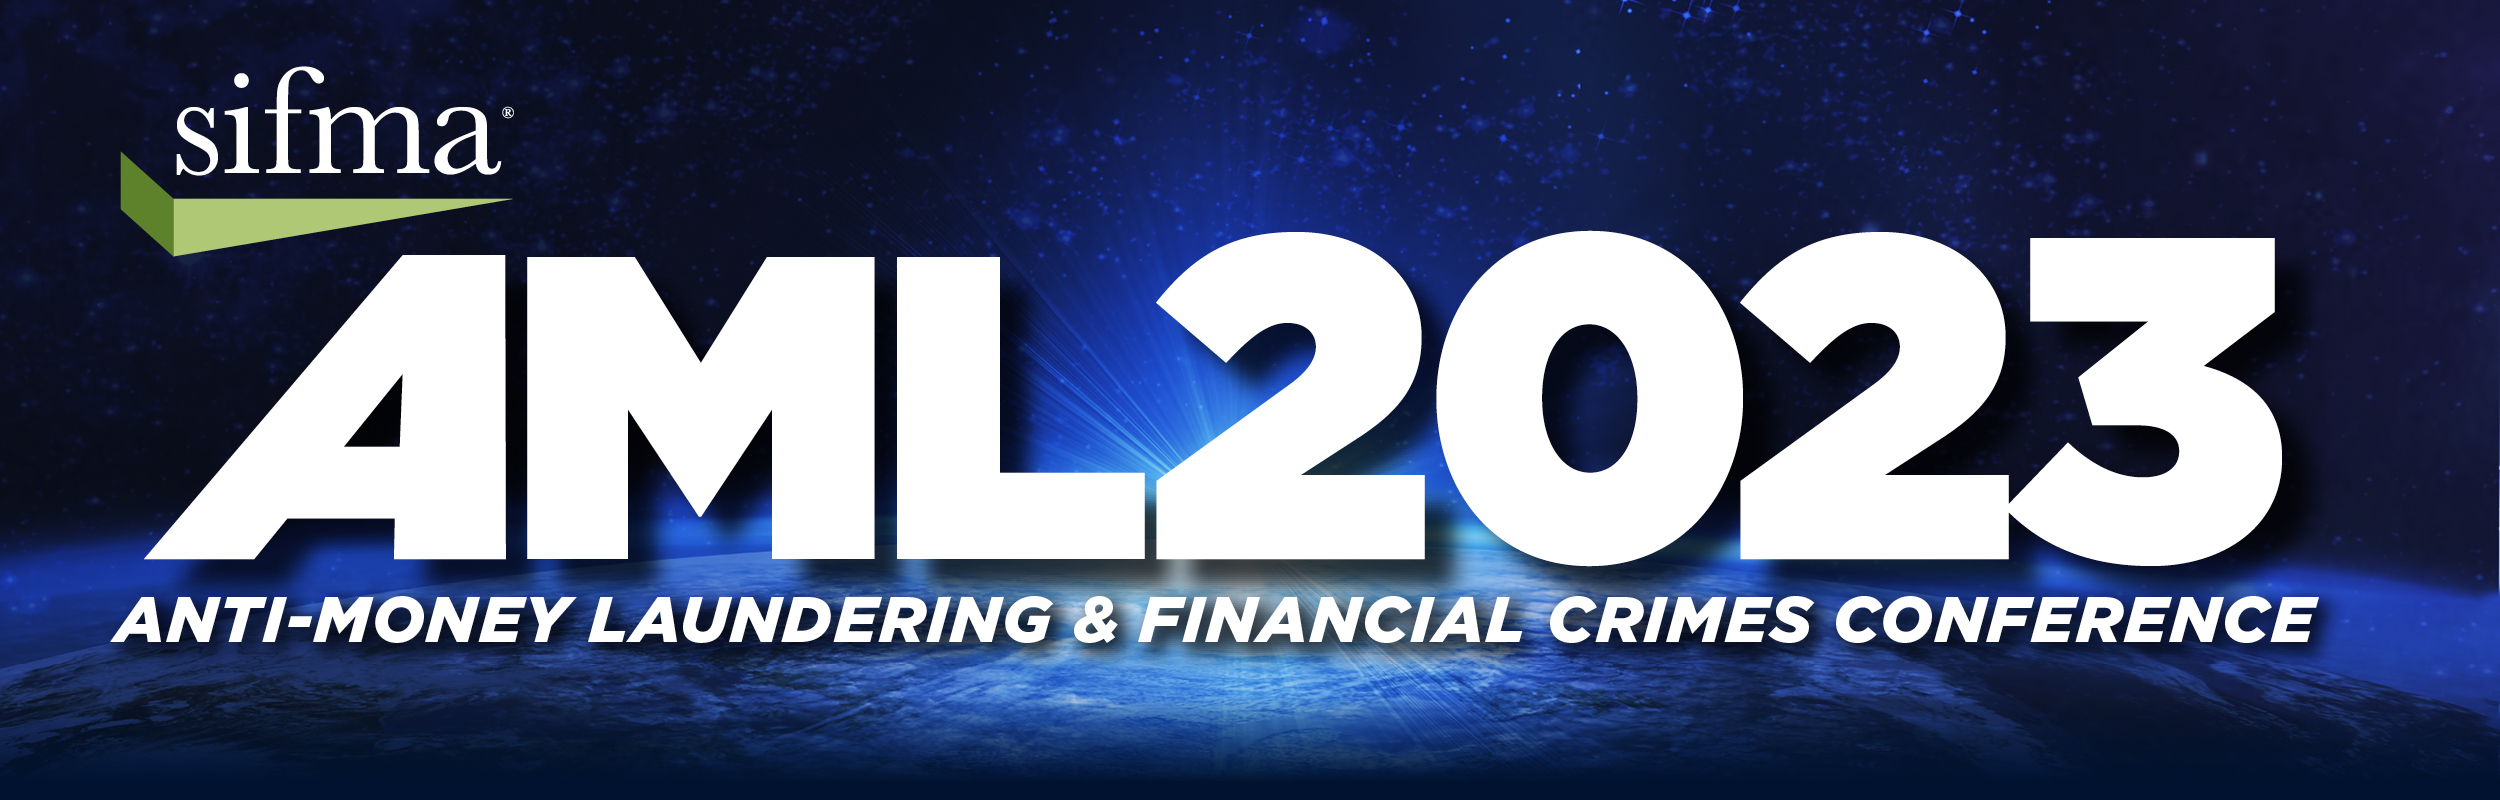 SIFMA 2023 Anti-Money Laundering & Financial Crimes Conference